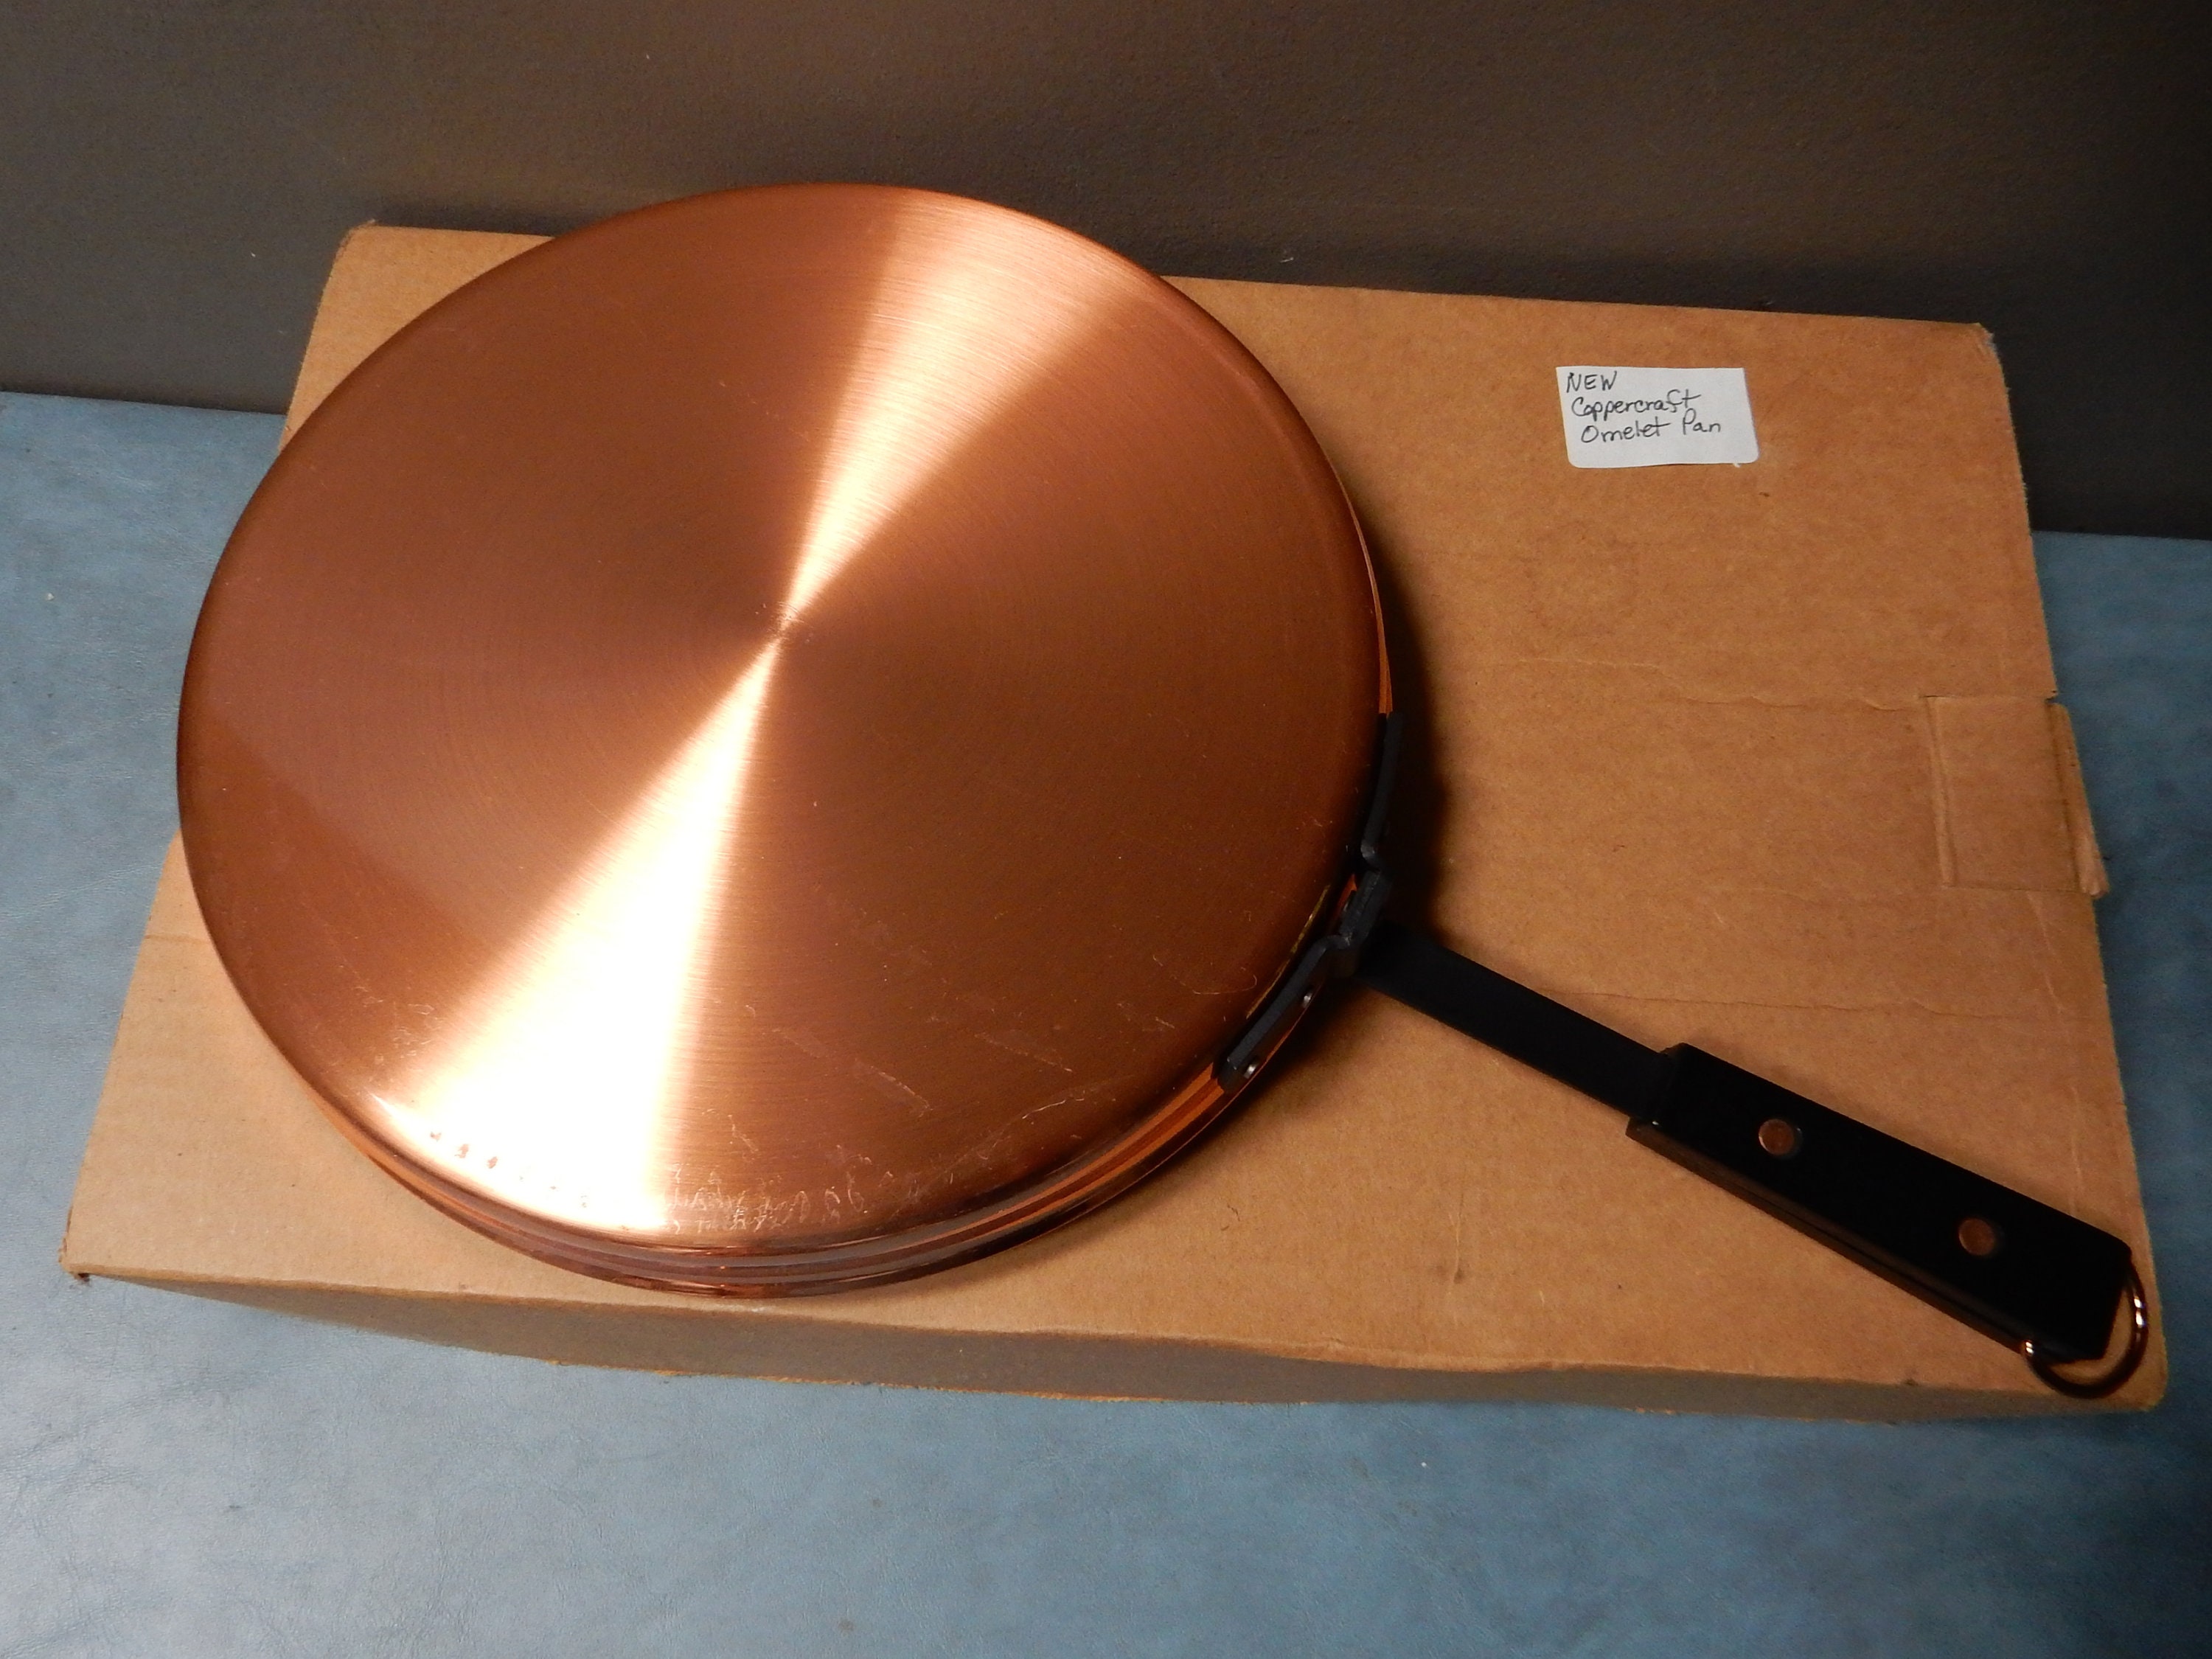 Hammered Copper Chef Pan, Handcrafted Authentic Red Copper Skillet, Turkish  Egg Omelet Frying Pans Sahan (9.4 Inches - 24 cm)